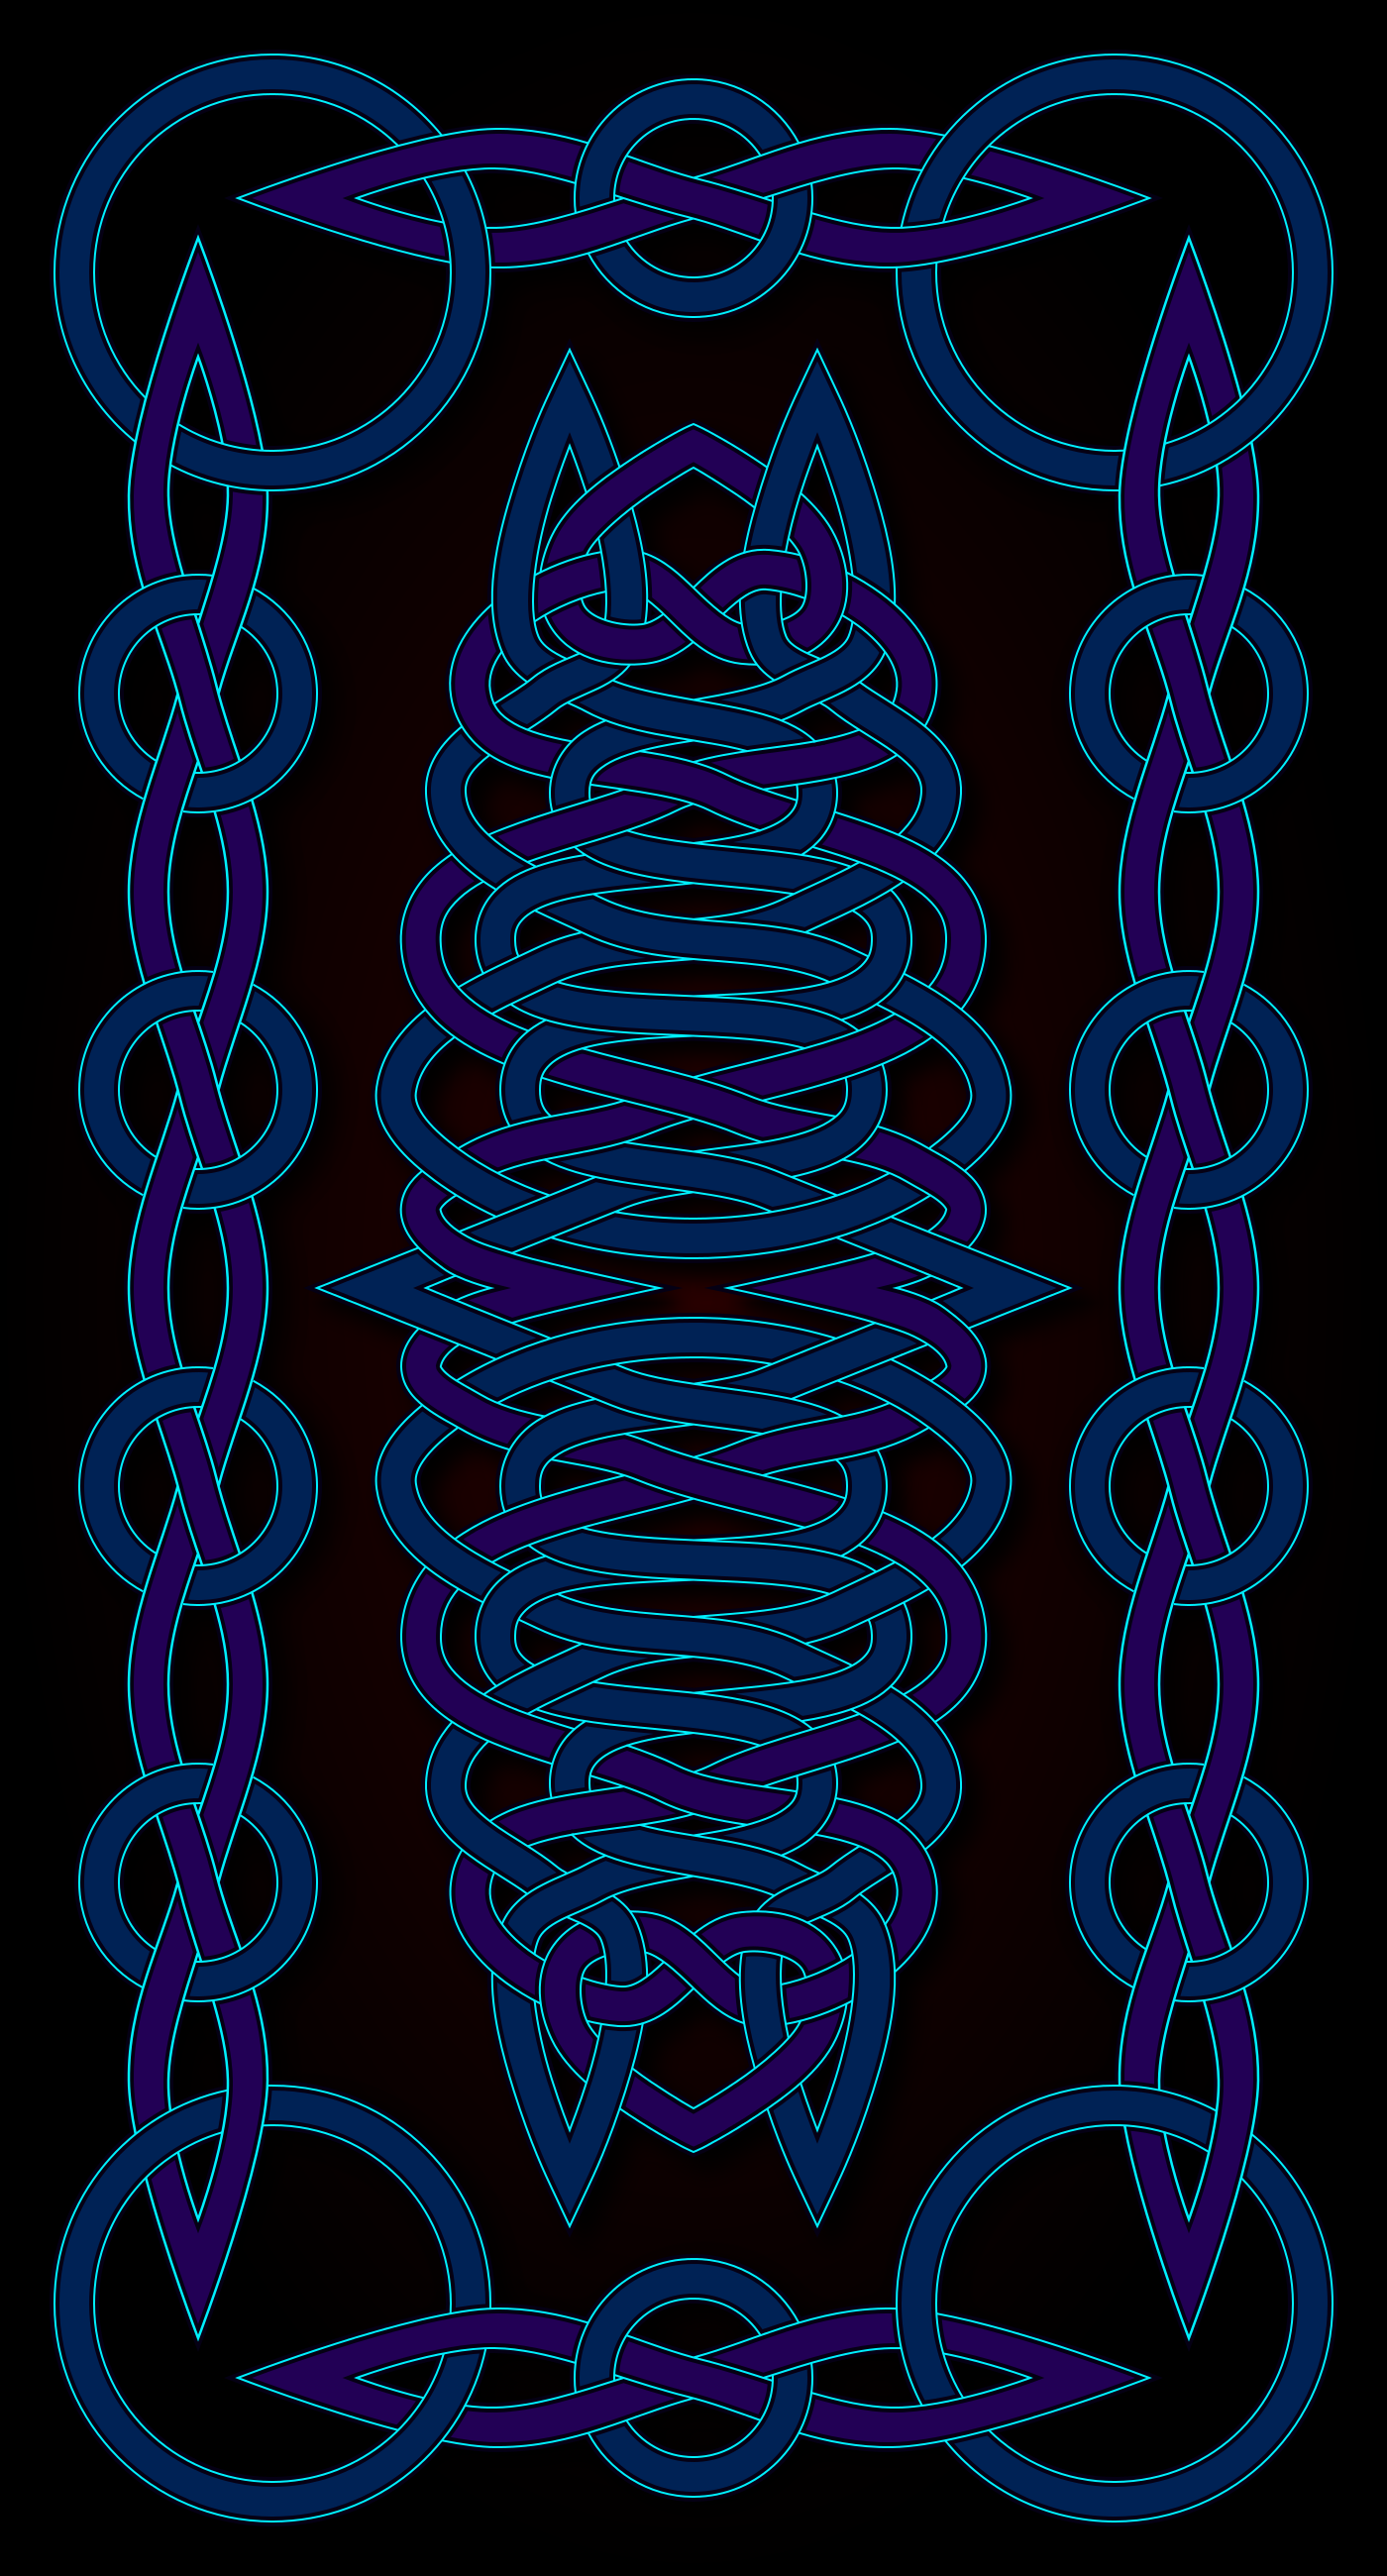 mirrored_knotwork_by_0bsidianfire-d5sfw8i.png